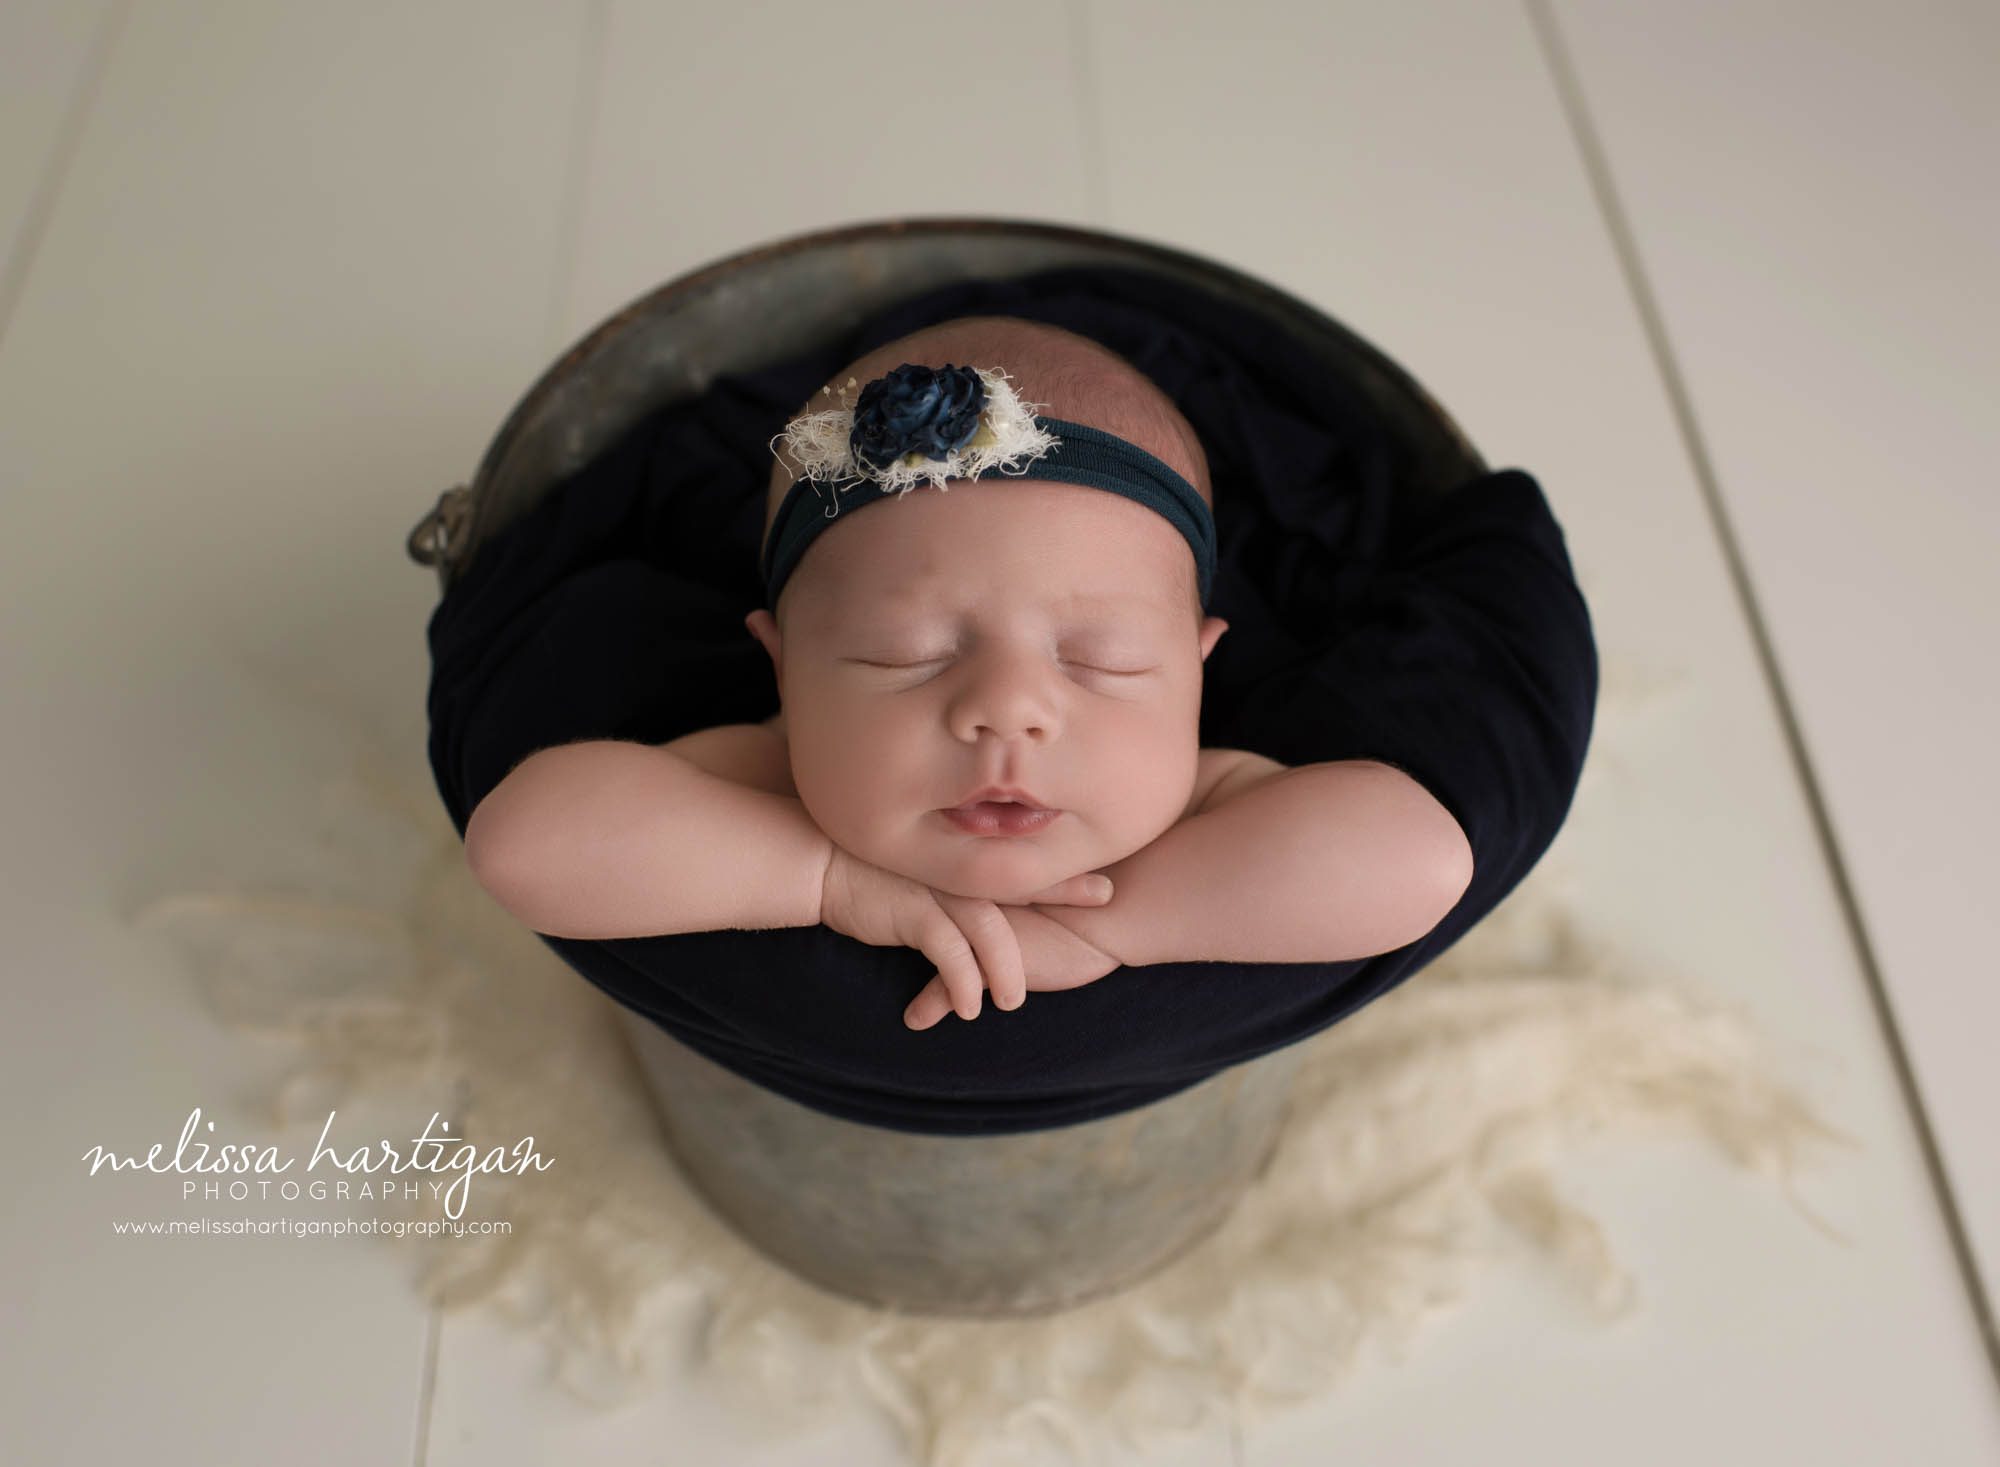 newbonr baby girl posed in metal bucket with navy blue wrap and headband